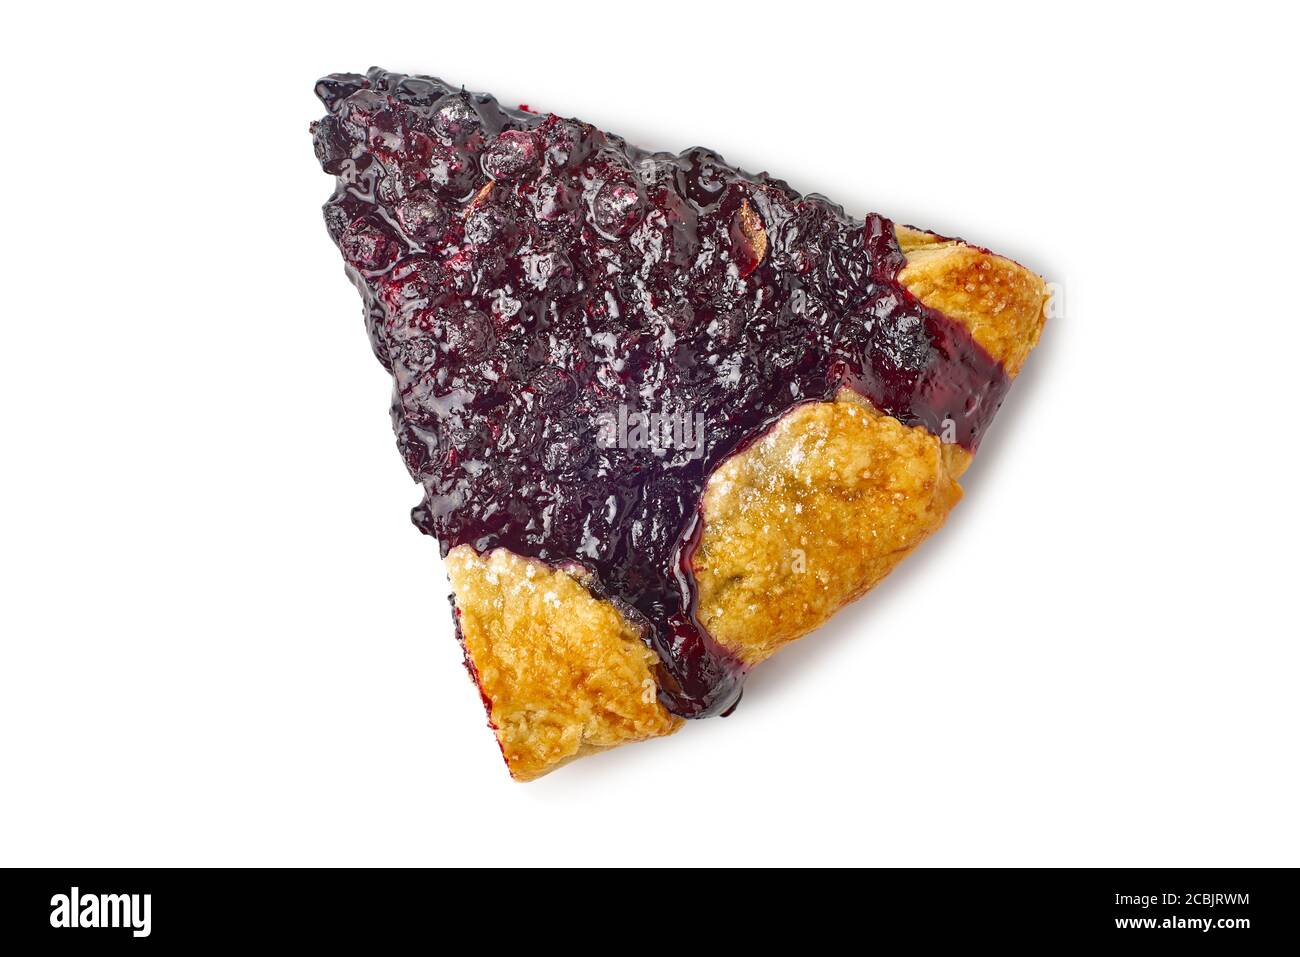 Piece of blueberries galette on white Stock Photo